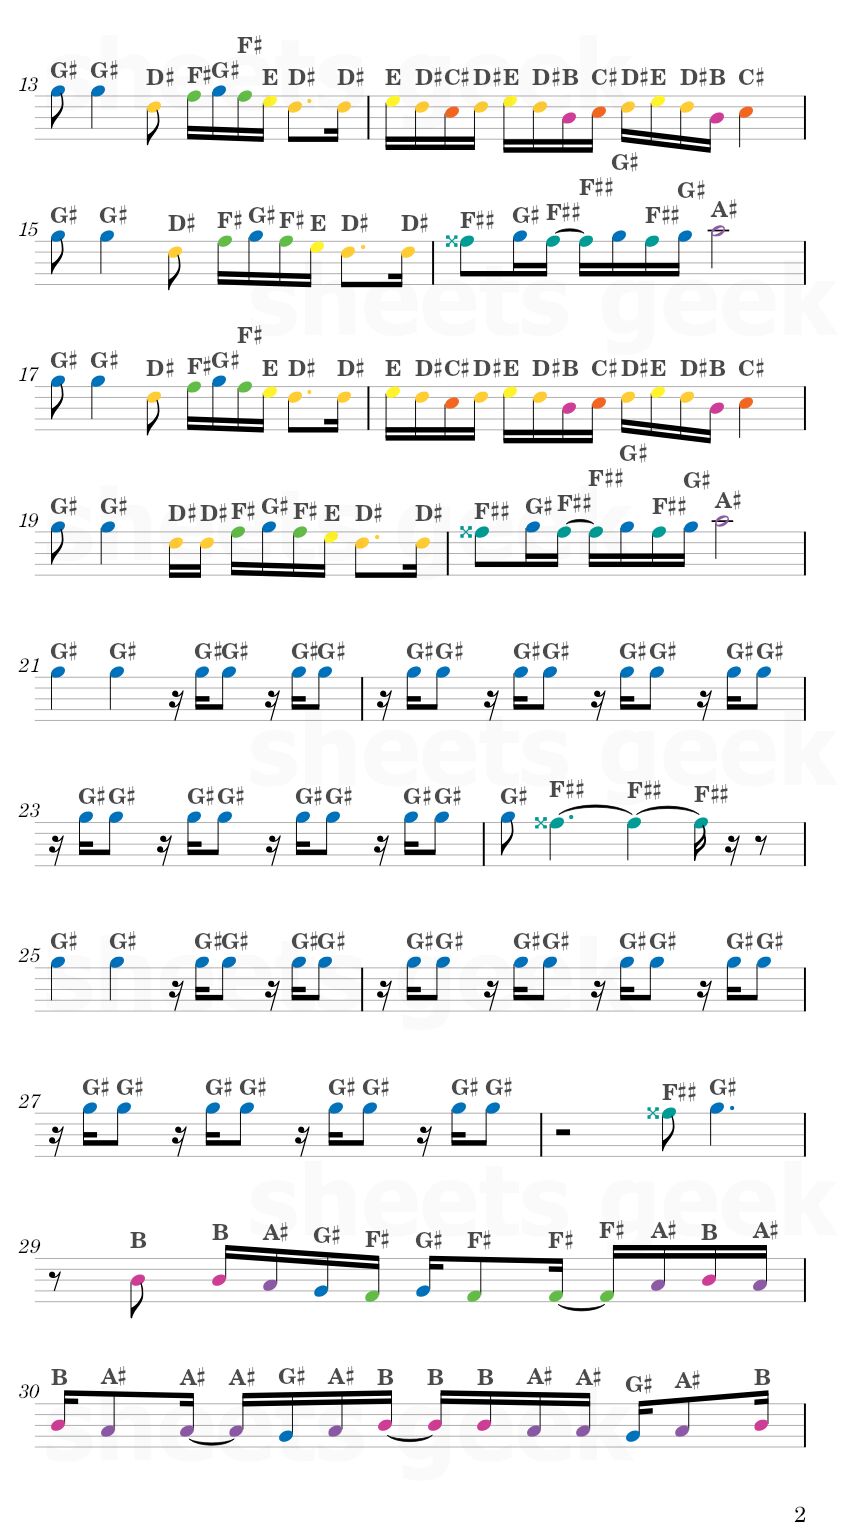 Discord - The Living Tombstone (My Little Pony: Friendship Is Magic) Easy Sheet Music Free for piano, keyboard, flute, violin, sax, cello page 2